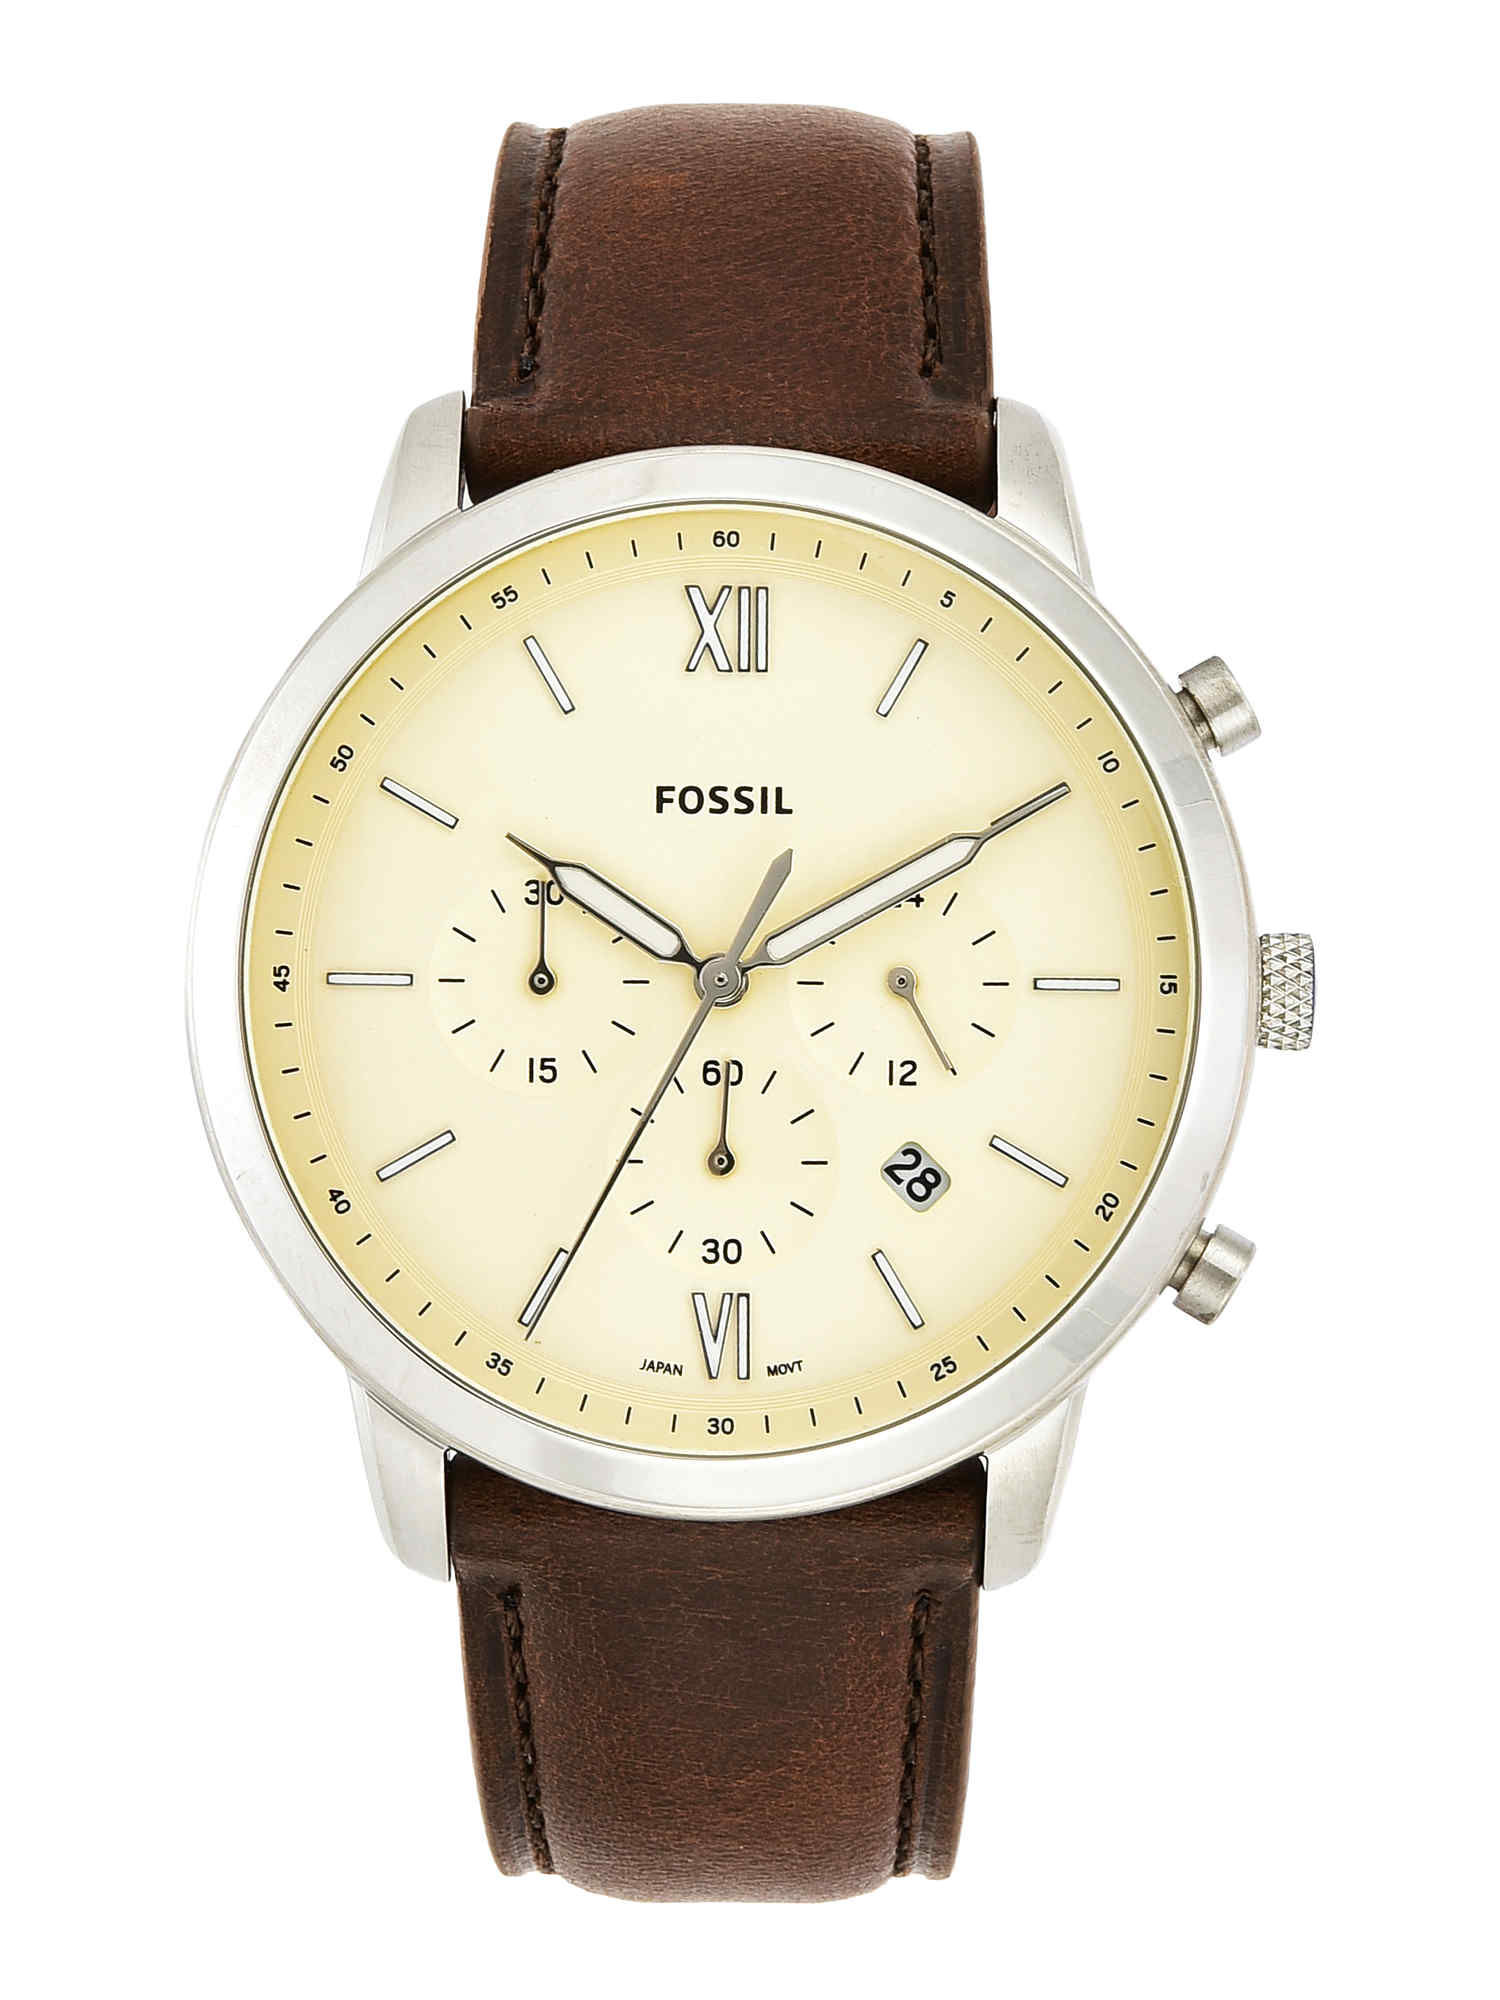 Fossil FS5380 Neutra Chrono Brown Watch For Men: Buy Fossil FS5380 ...